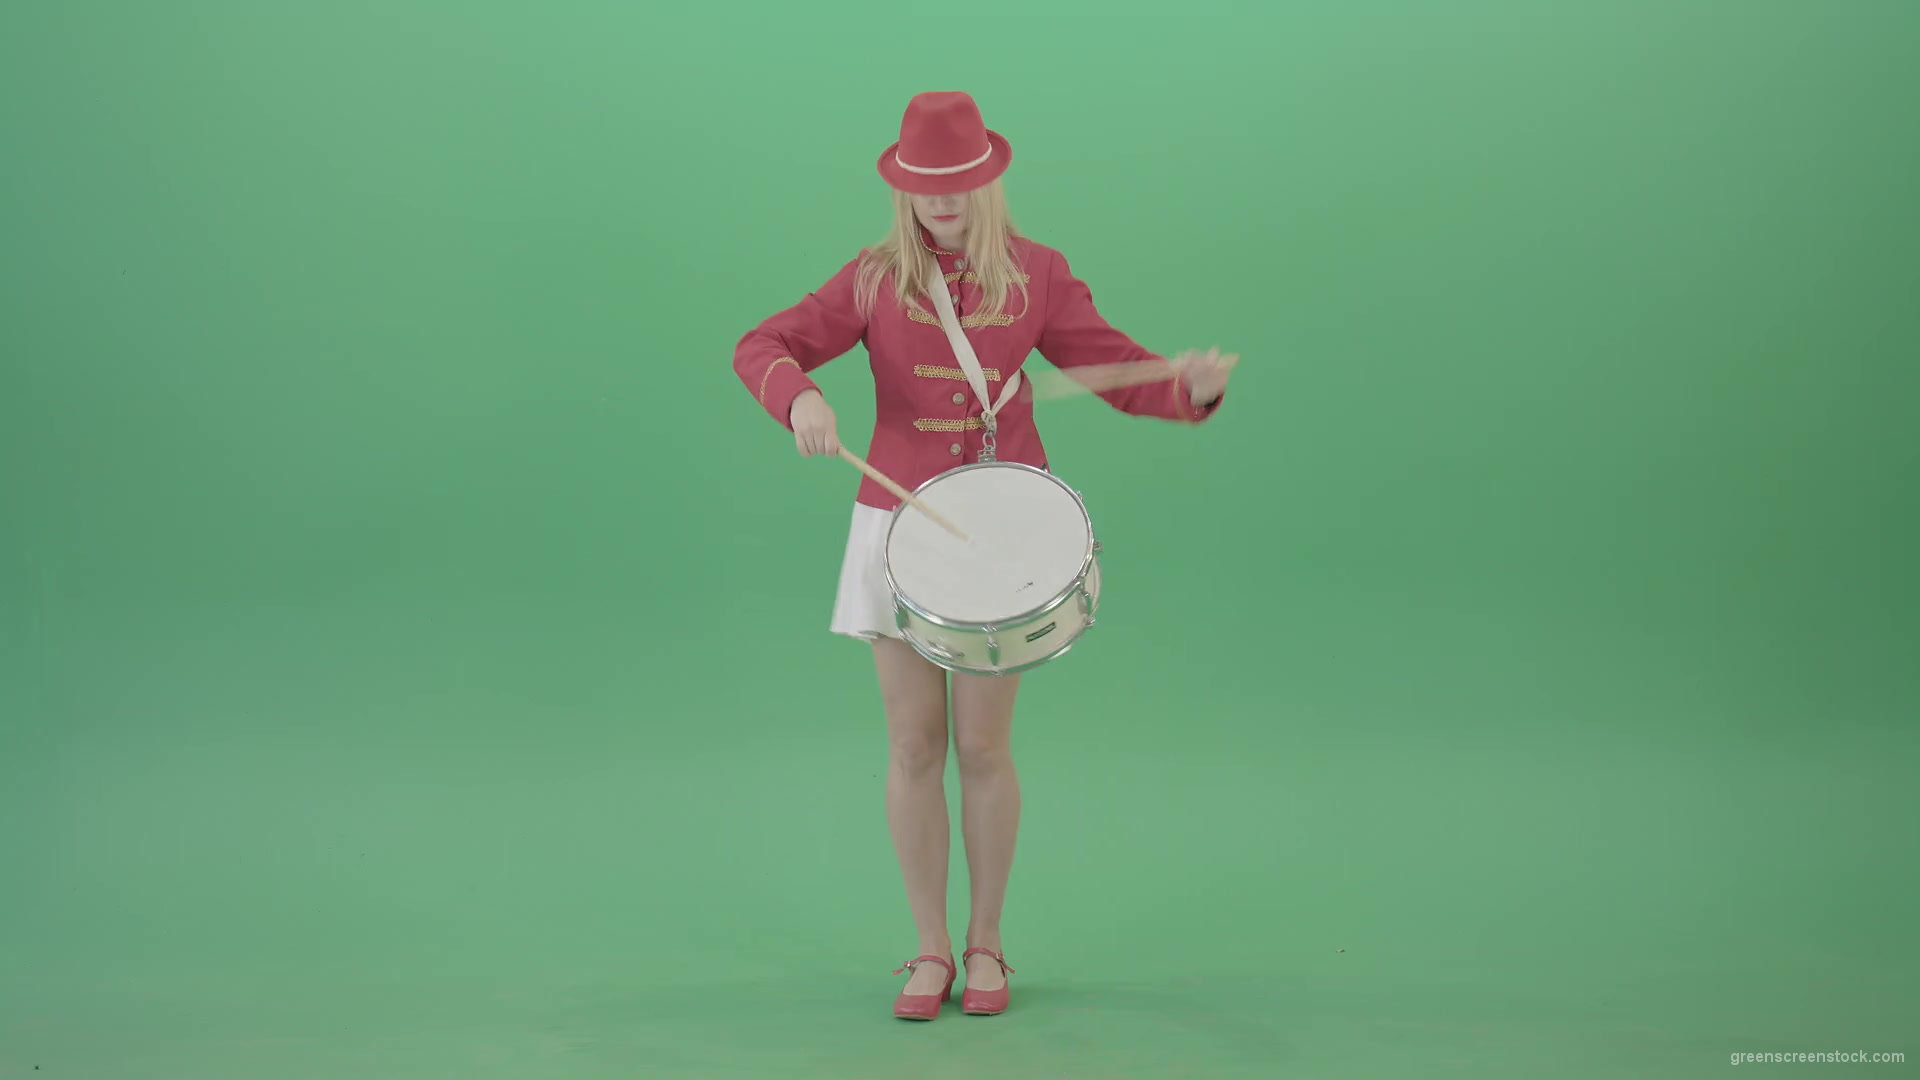 Girl-in-red-dress-marching-and-playing-drum-snare-music-instrument-over-green-screen-4K-Video-Footage-1920_006 Green Screen Stock